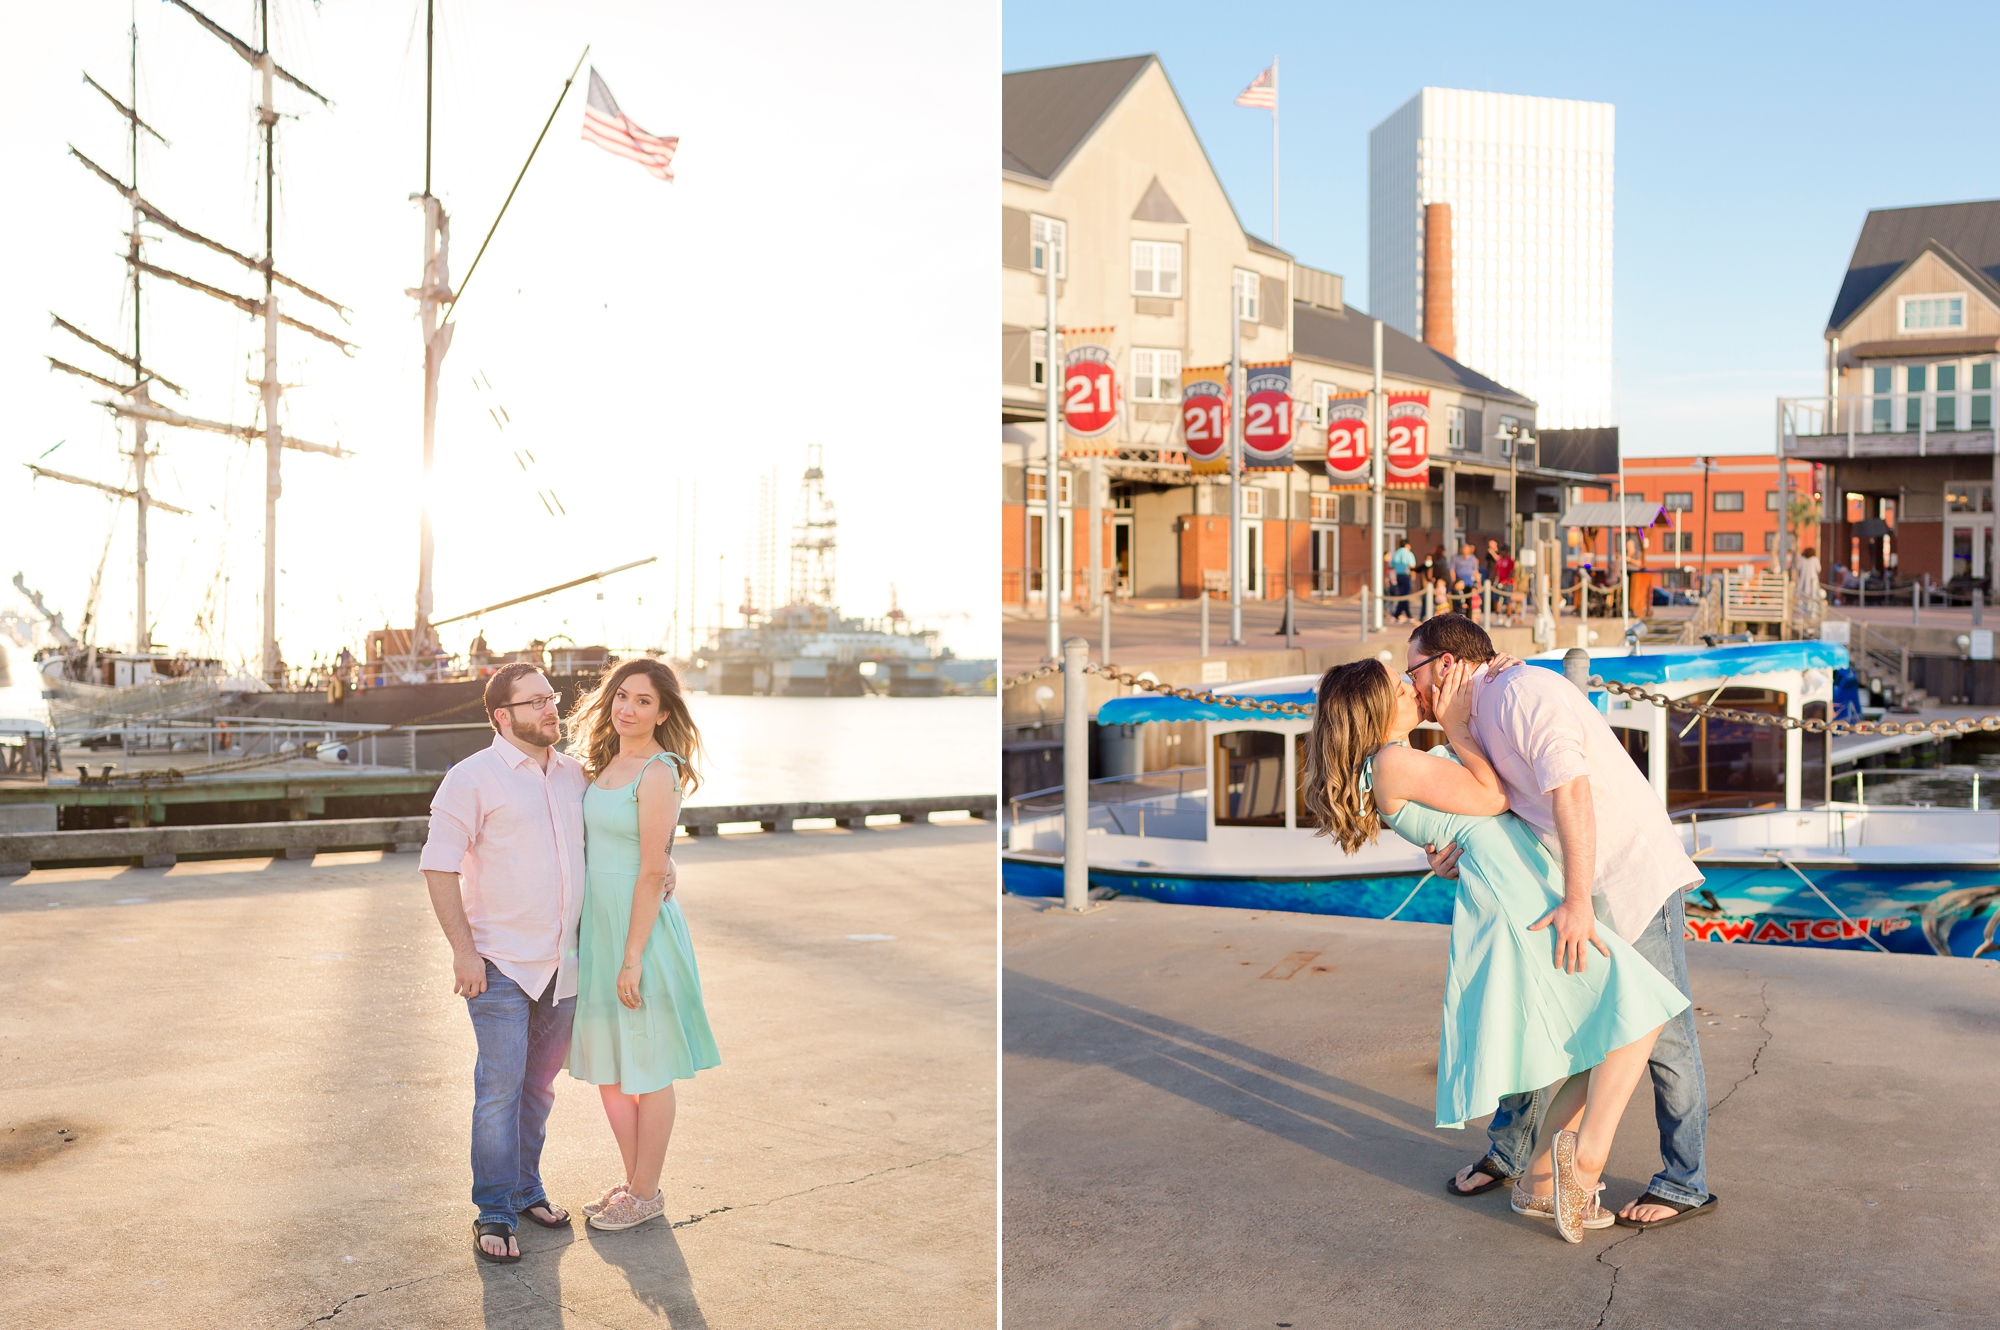 Couple at engagement session photo location Pier 21